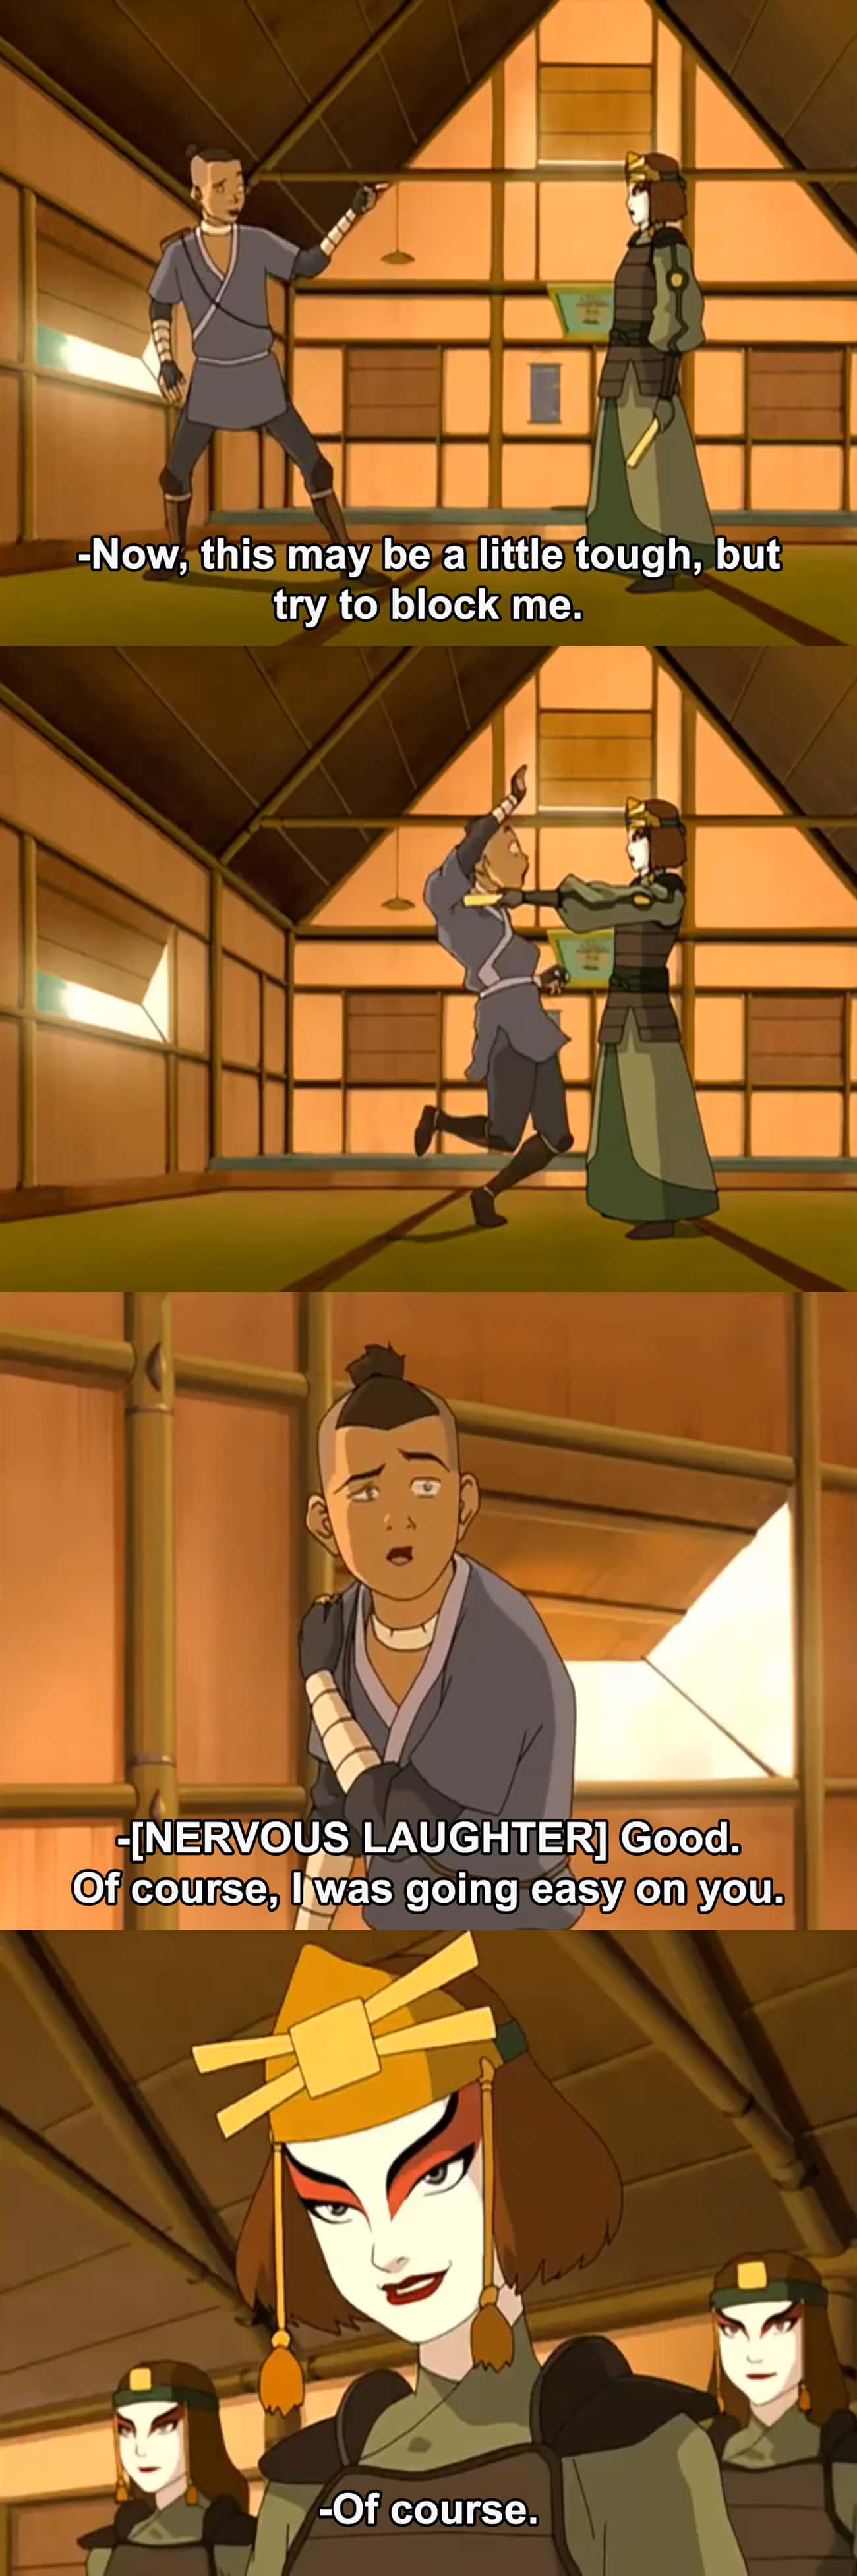 15 Times Avatar The Last Airbender Had The Best Clapbacks Against Sexism